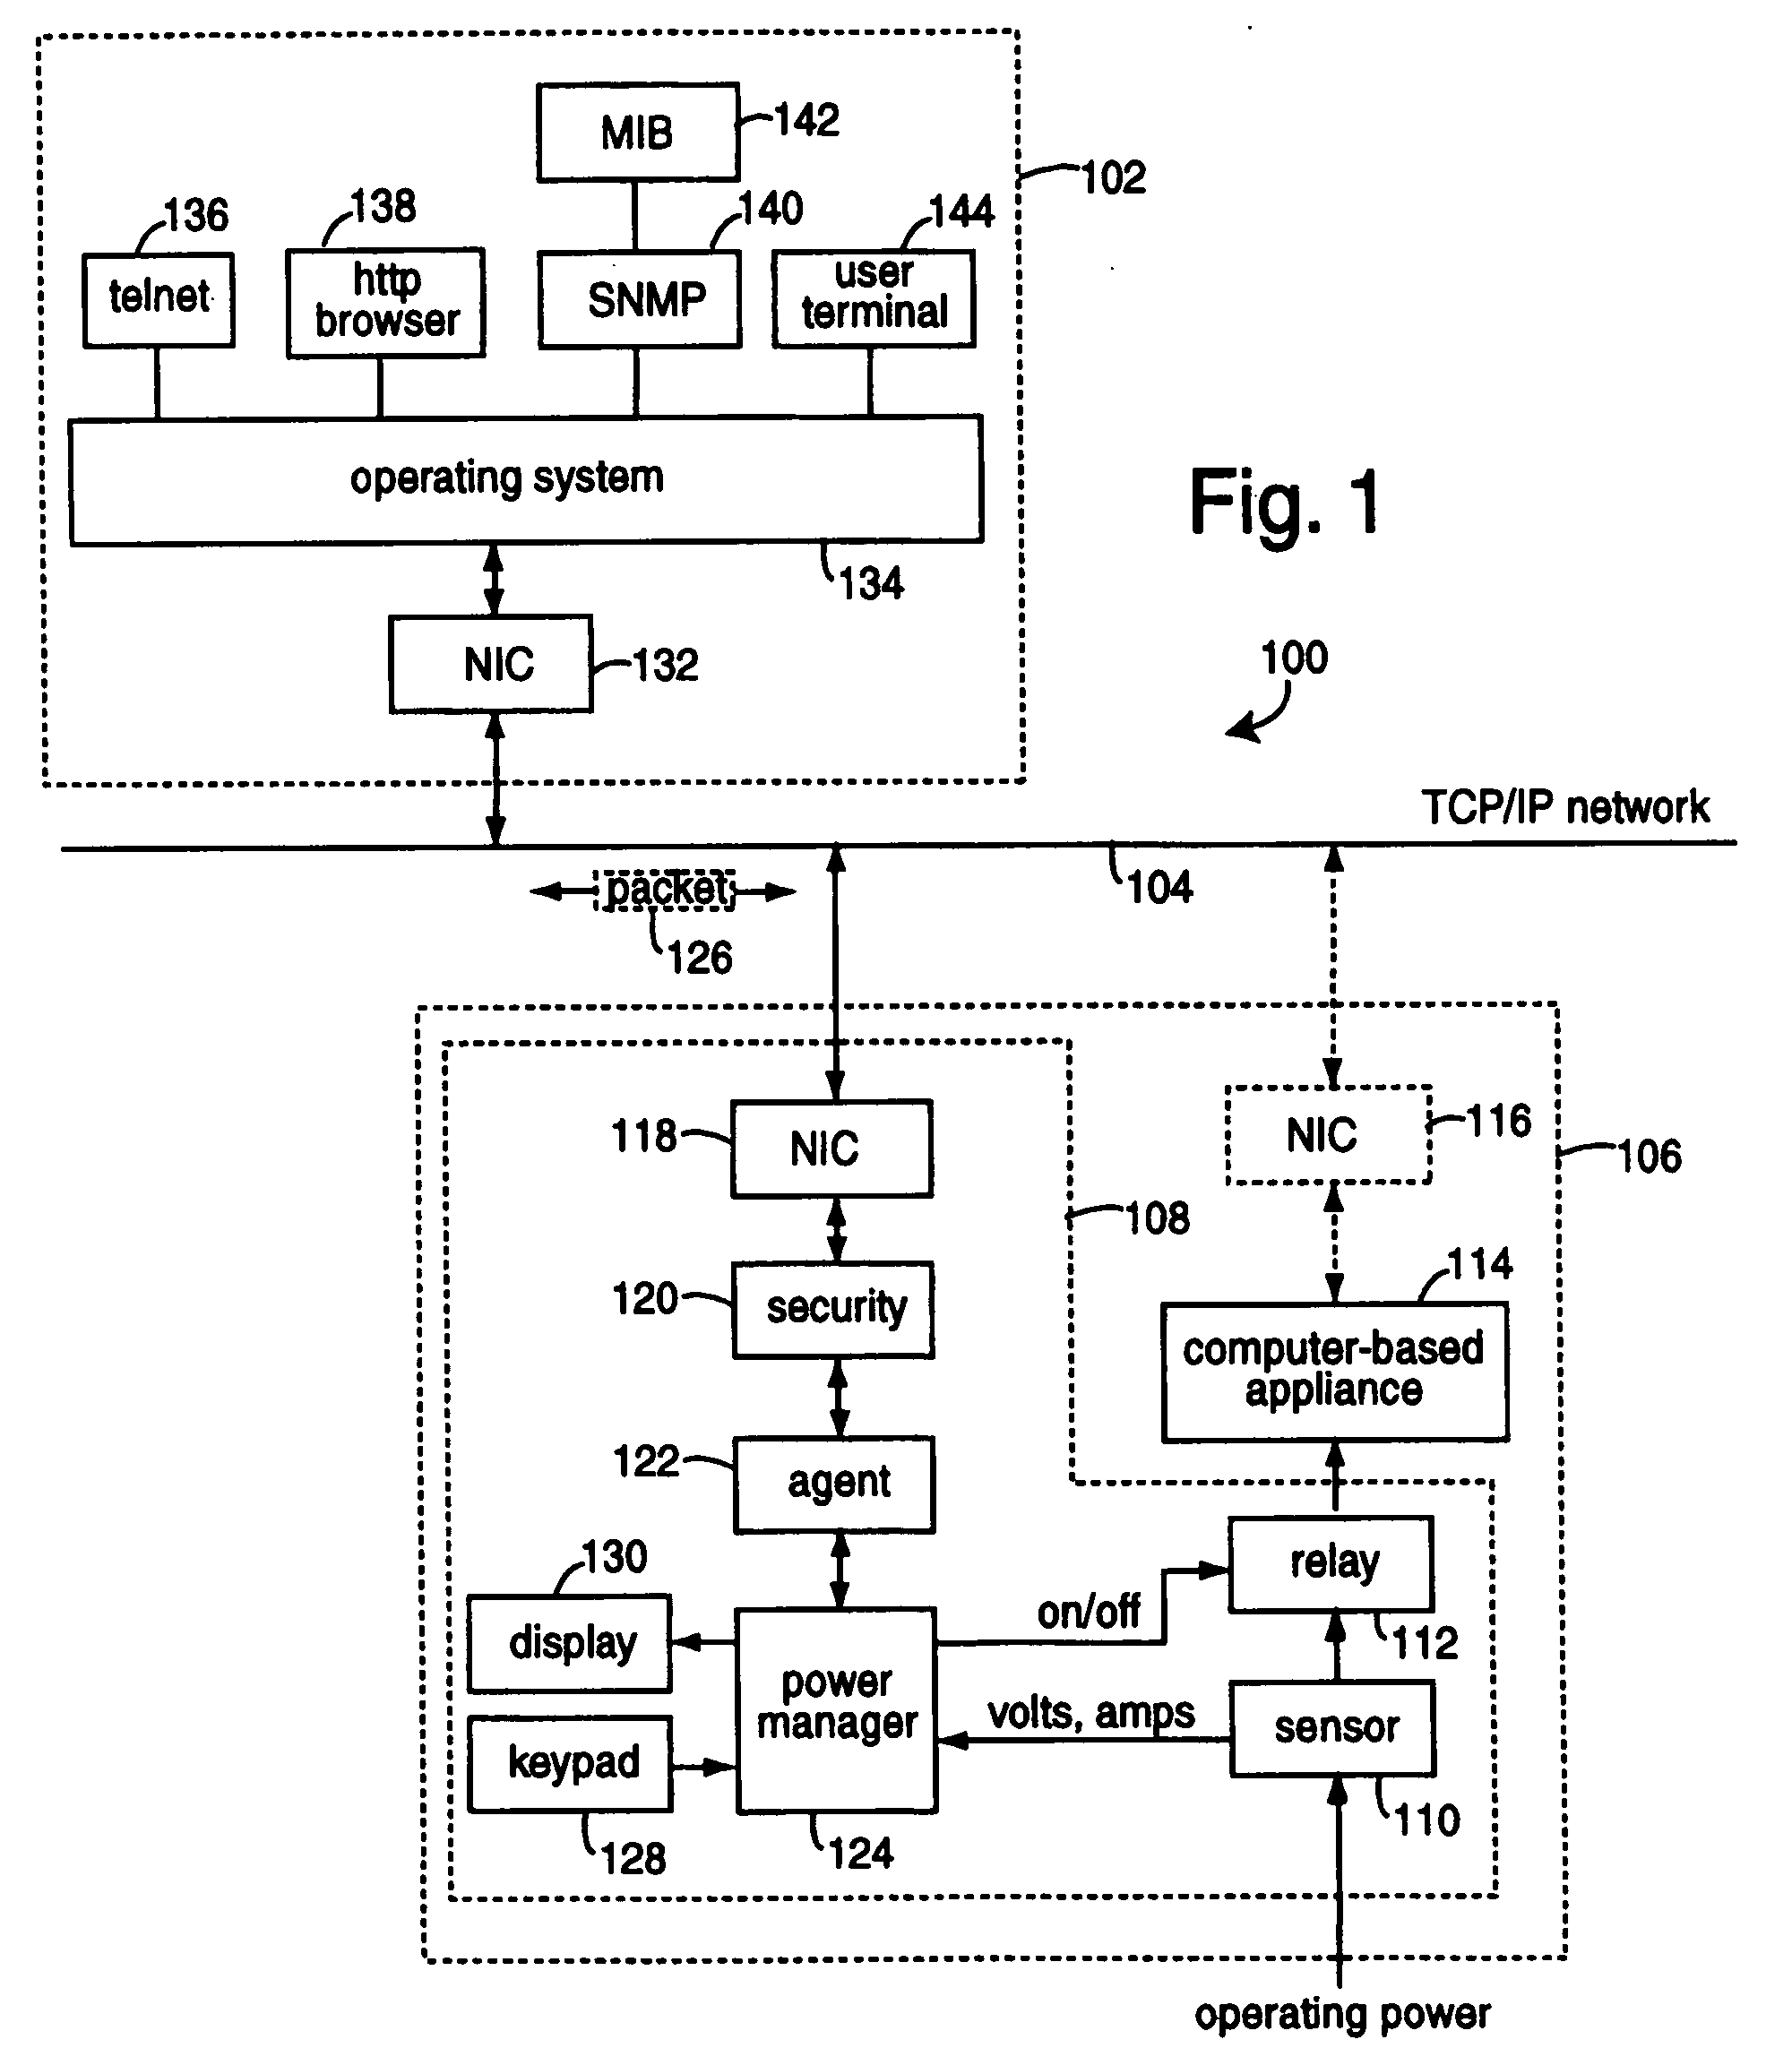 Network-connected power manager for rebooting remote computer-based appliances